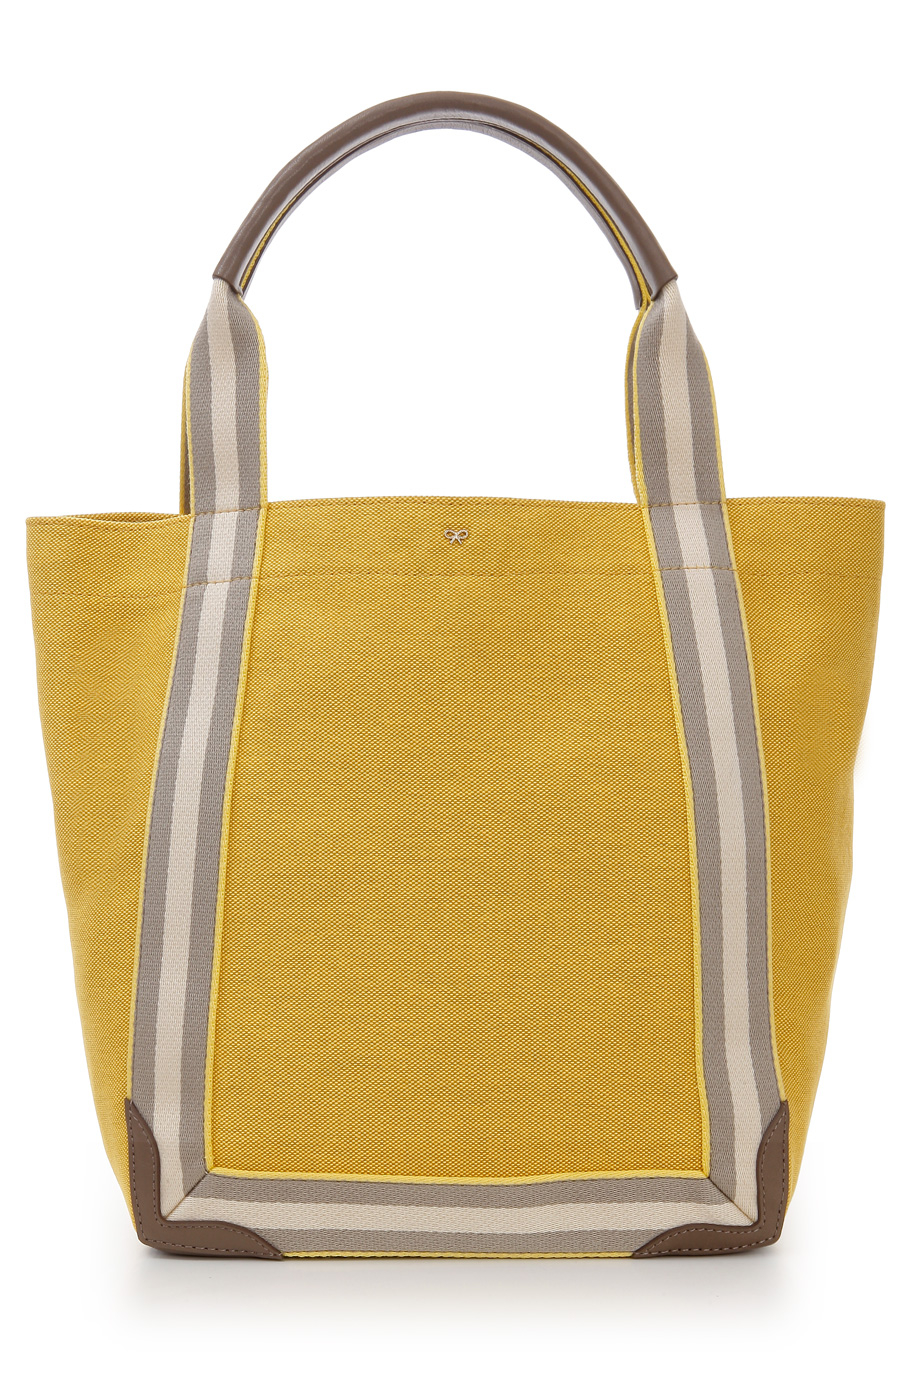 Anya Hindmarch Pont Small Canvas Tote Bag in Yellow | Lyst